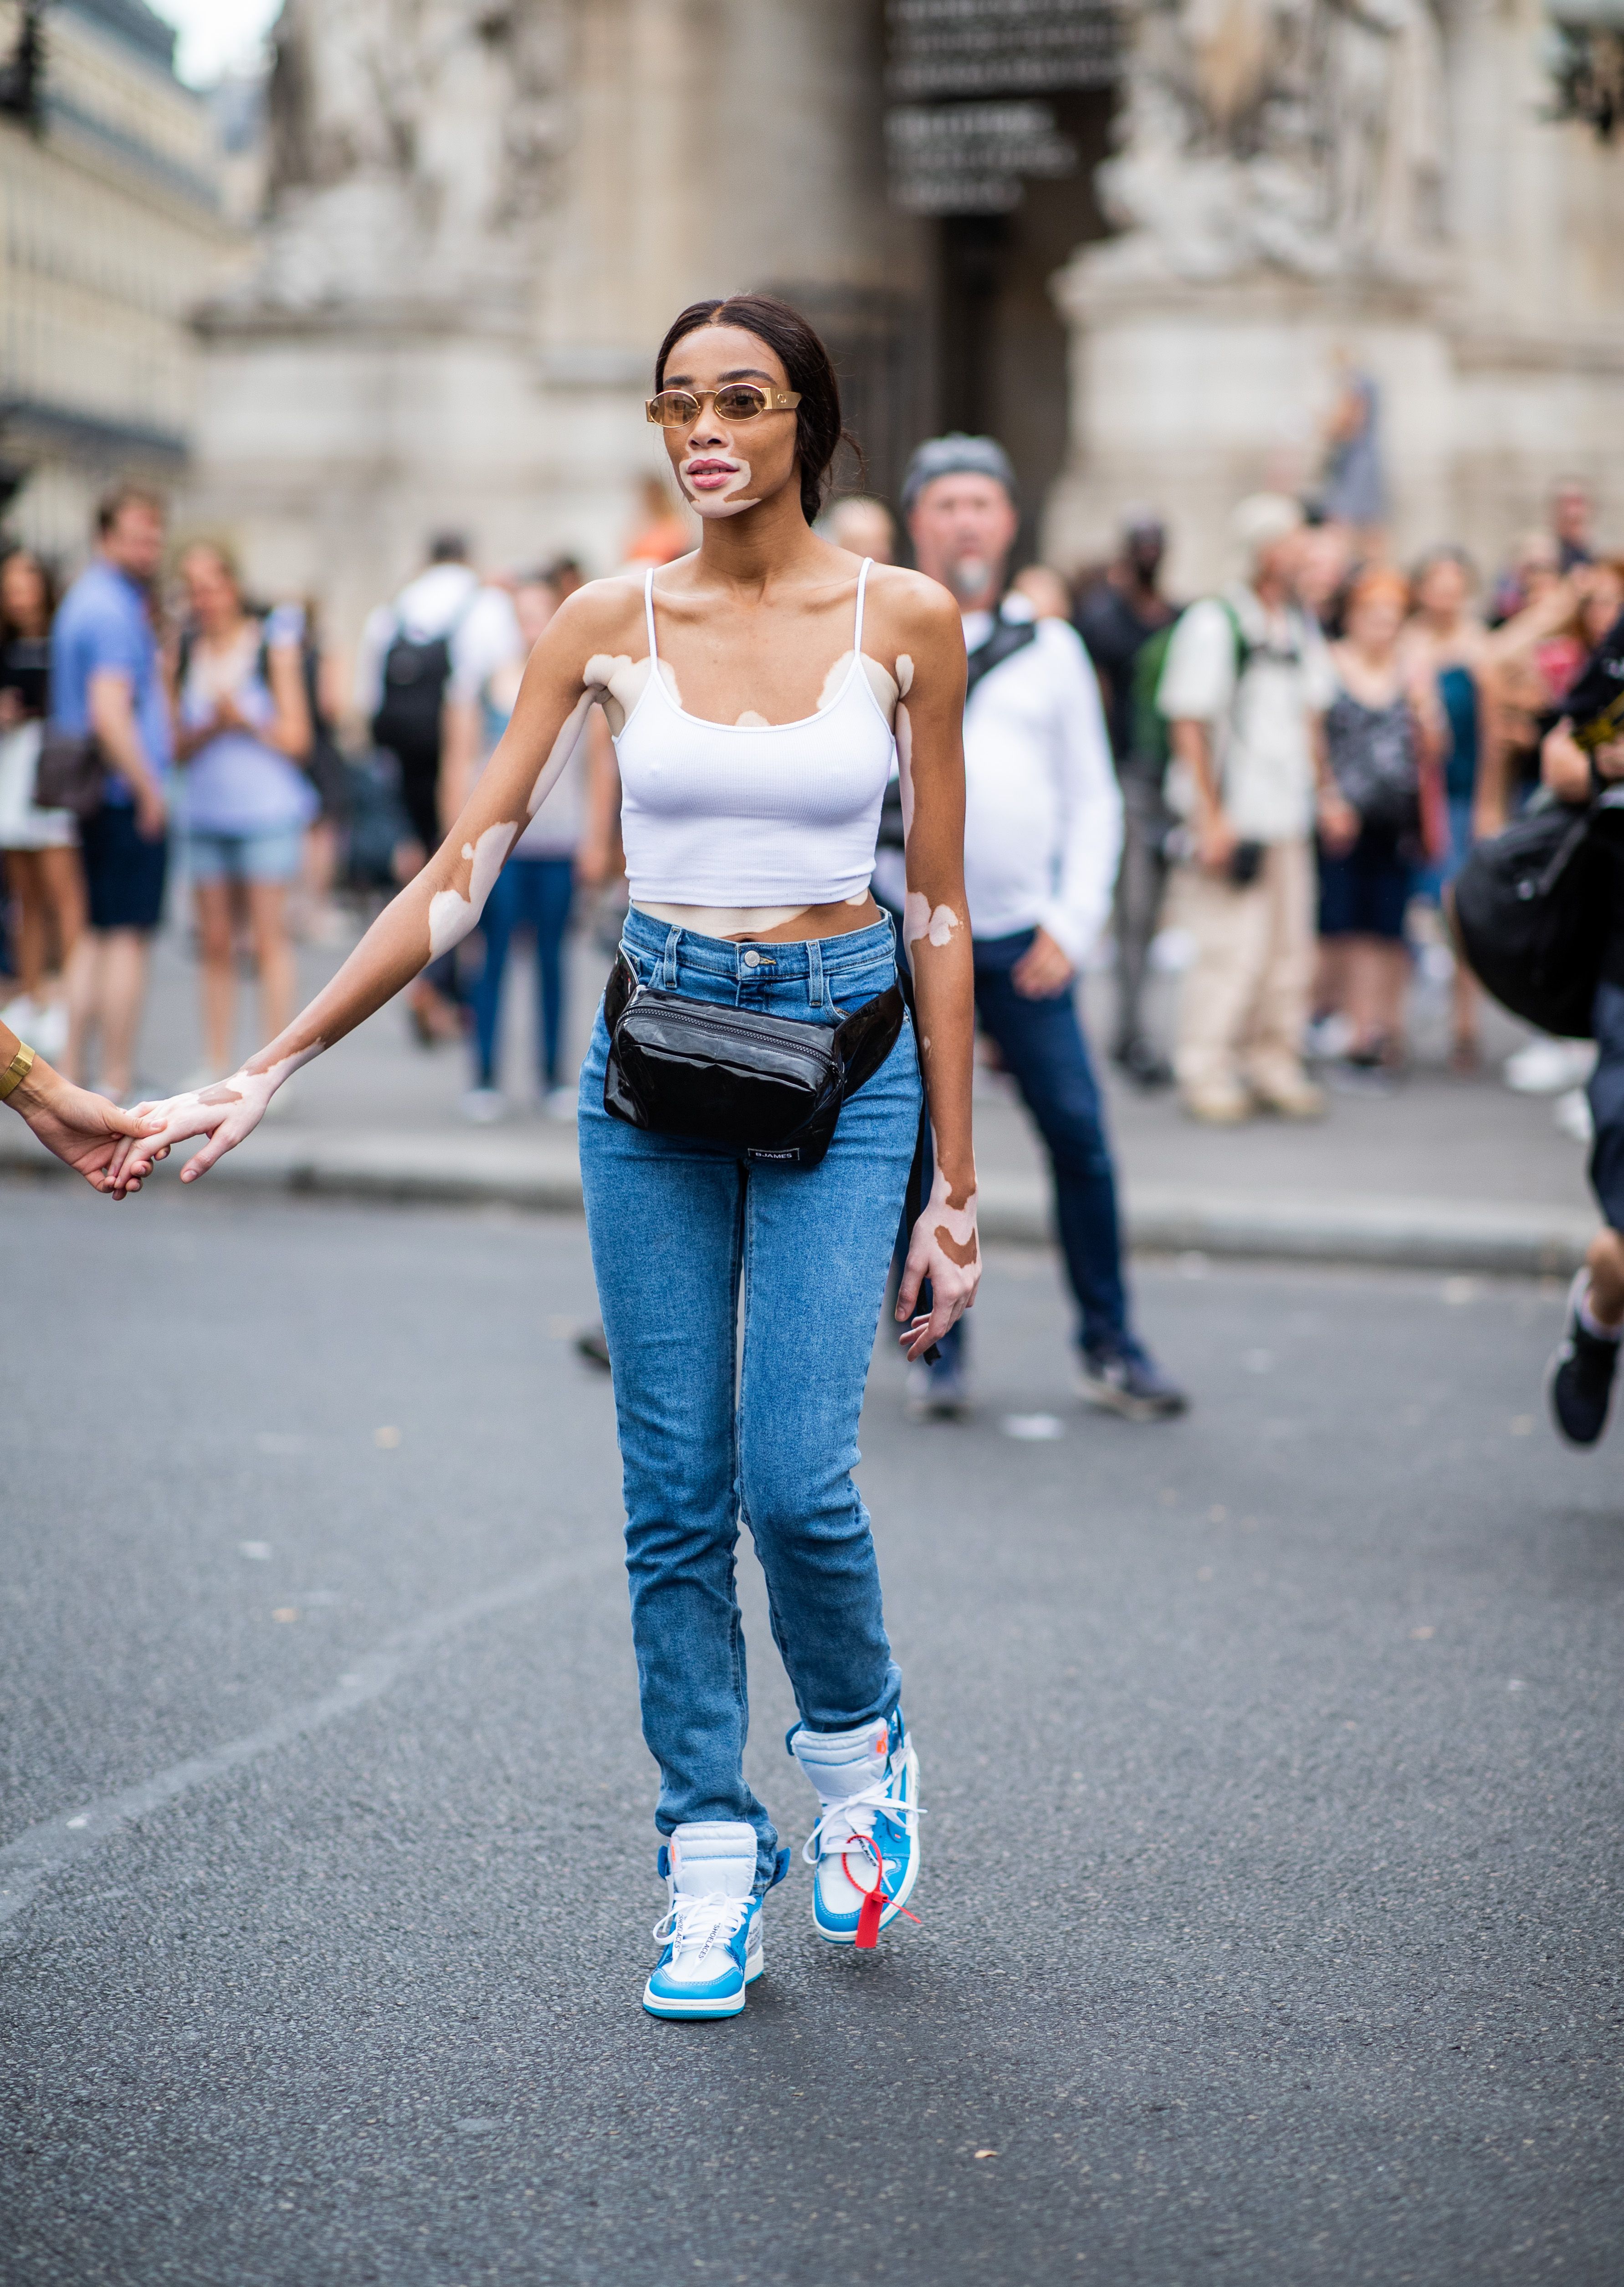 How To Wear A Fanny Pack In 9 Ways: Fashion Faux Pas To Fabulous